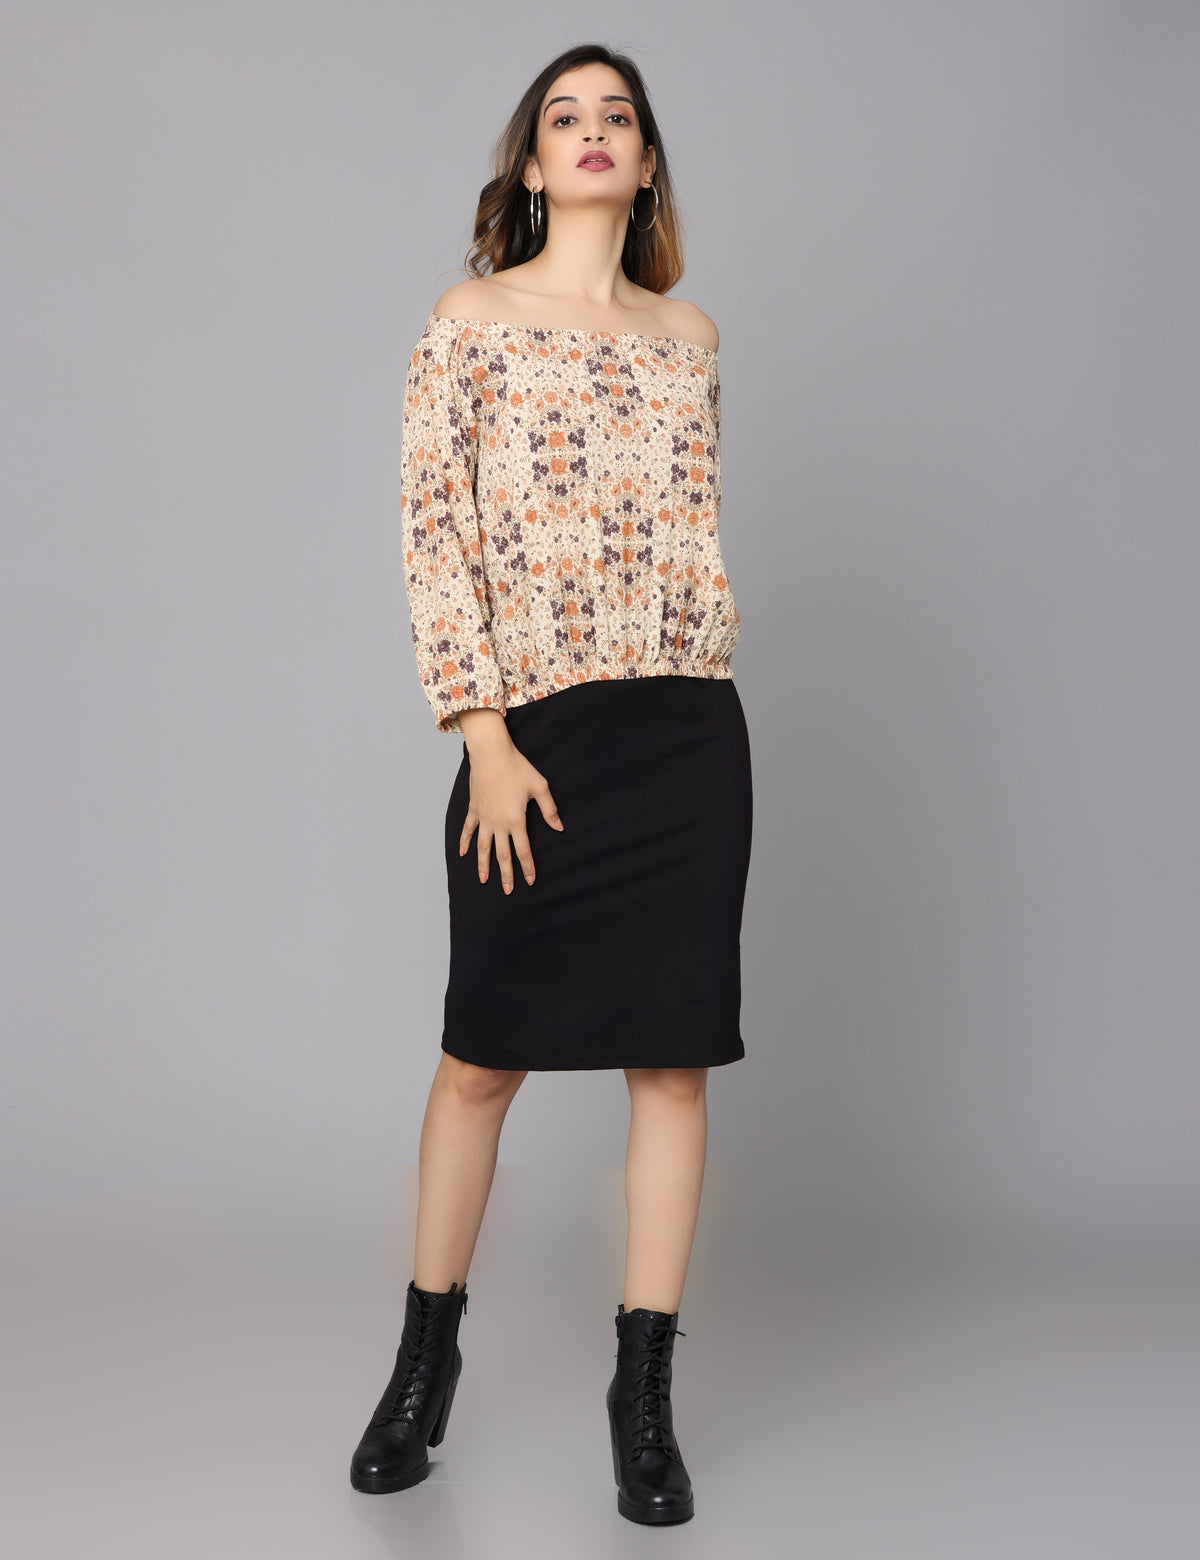 Upgrade Your Wardrobe with a Beige Printed Off Shoulder Top – Shop Now